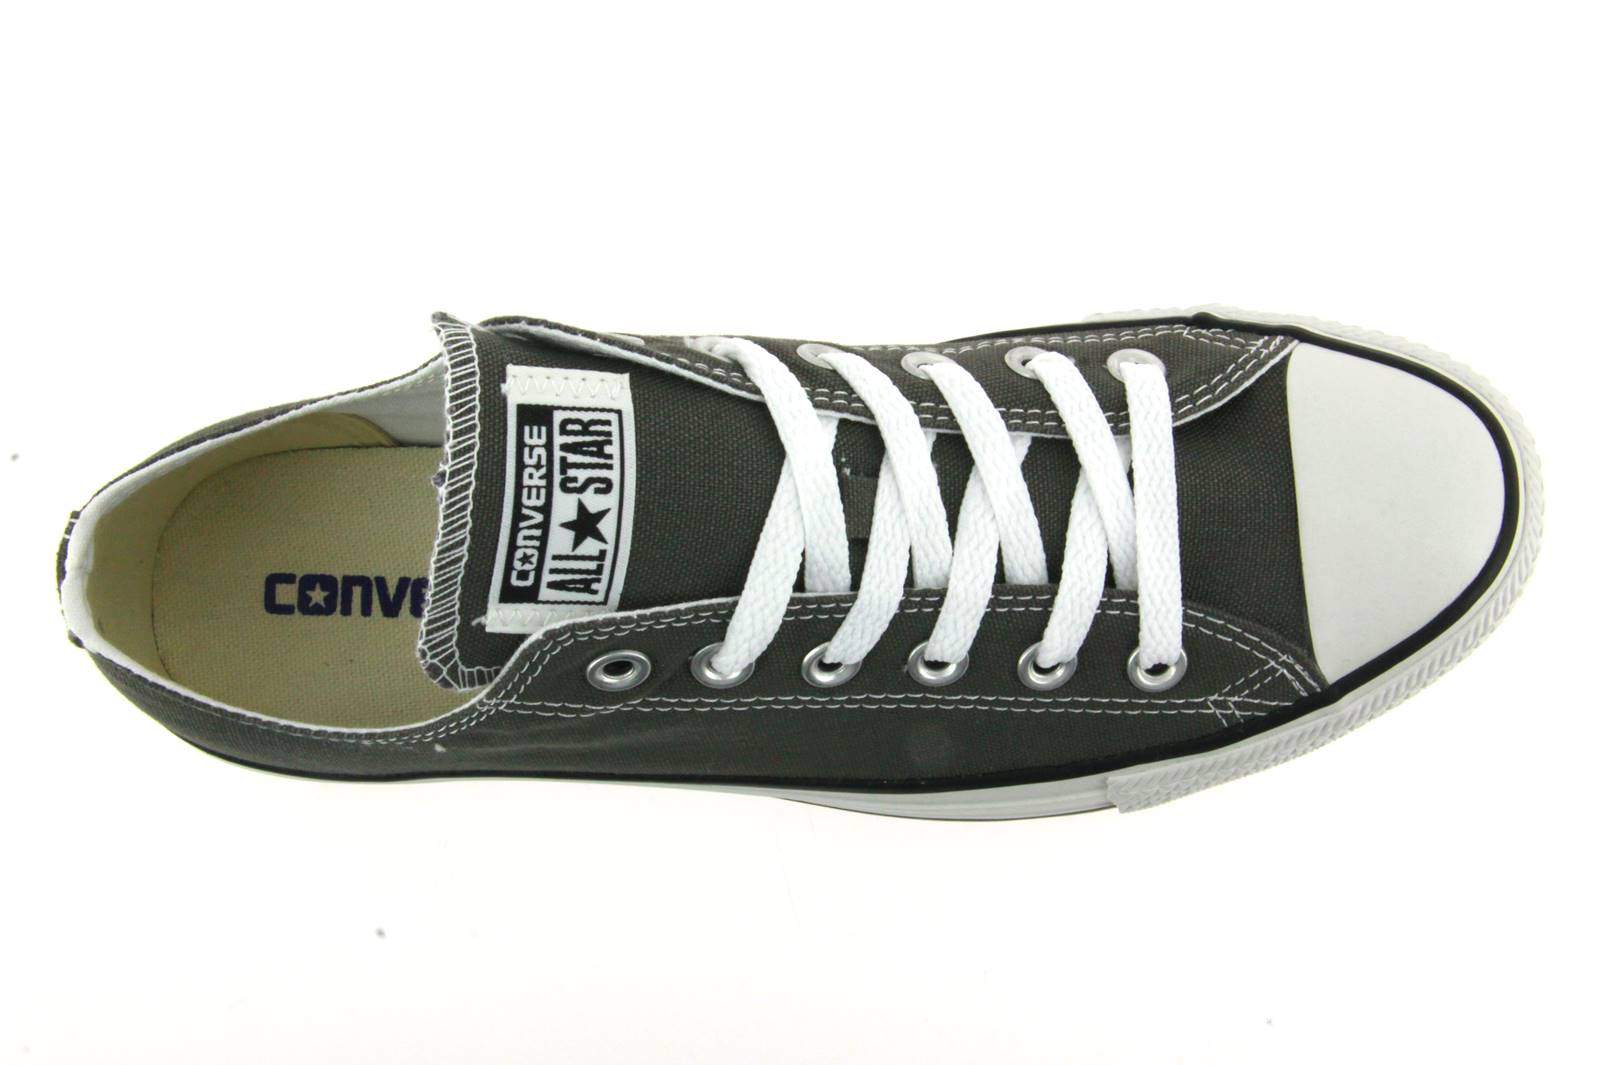 Converse ALL STAR CHUCK TAYLOR CHARCOAL (41½)